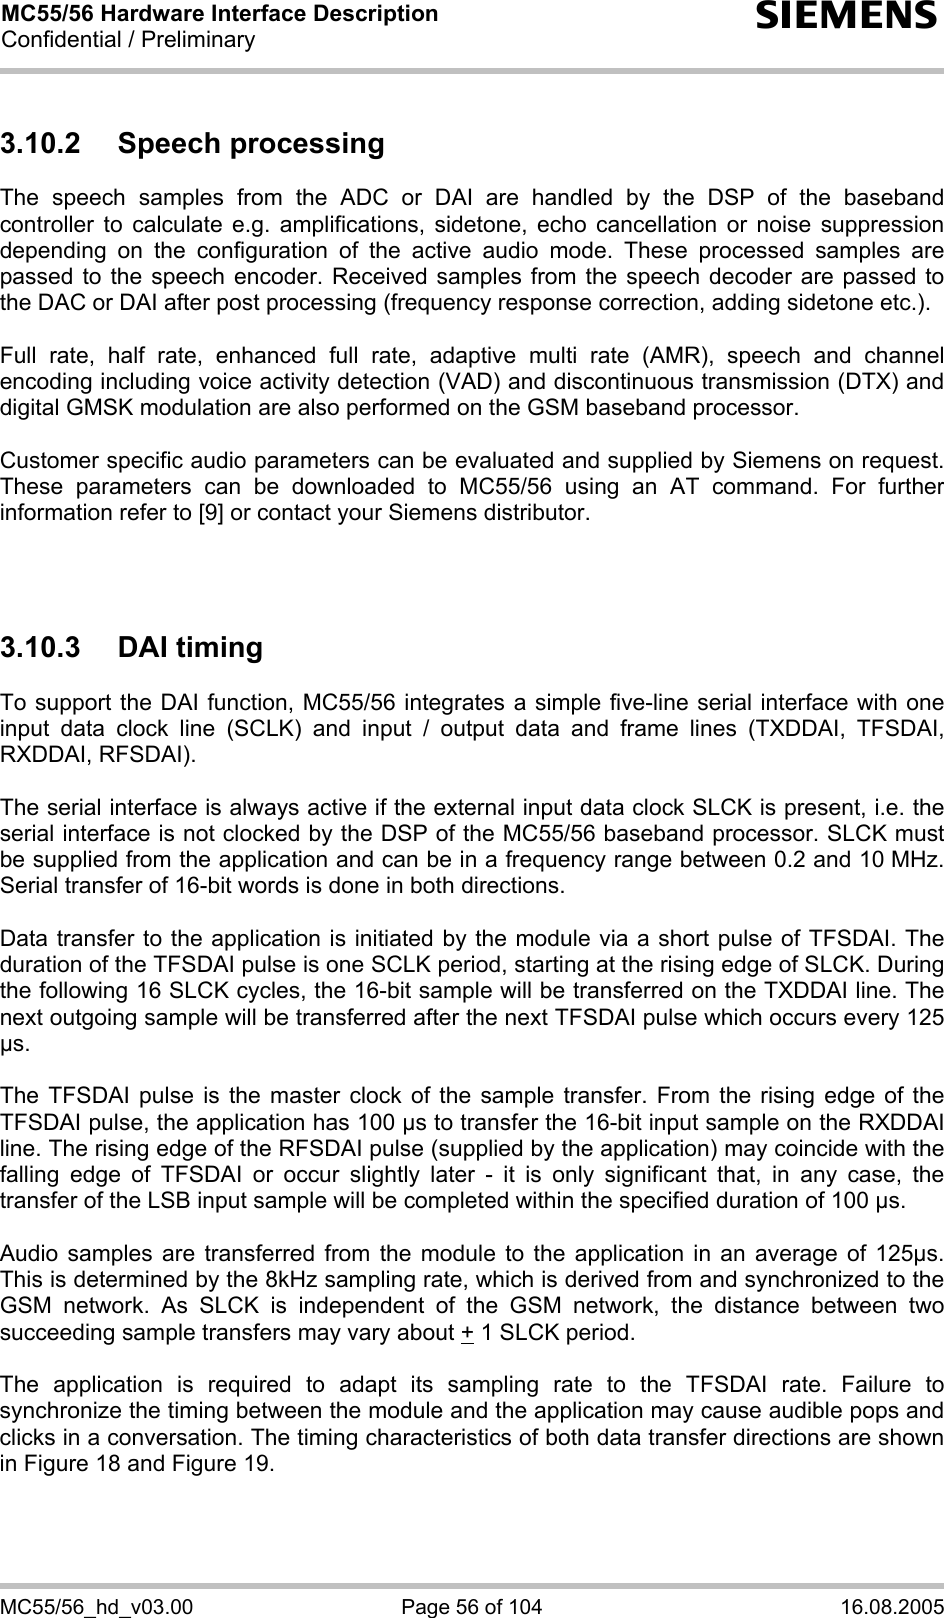 MC55/56 Hardware Interface Description Confidential / Preliminary s MC55/56_hd_v03.00  Page 56 of 104  16.08.2005 3.10.2 Speech processing The speech samples from the ADC or DAI are handled by the DSP of the baseband controller to calculate e.g. amplifications, sidetone, echo cancellation or noise suppression depending on the configuration of the active audio mode. These processed samples are passed to the speech encoder. Received samples from the speech decoder are passed to the DAC or DAI after post processing (frequency response correction, adding sidetone etc.).  Full rate, half rate, enhanced full rate, adaptive multi rate (AMR), speech and channel encoding including voice activity detection (VAD) and discontinuous transmission (DTX) and digital GMSK modulation are also performed on the GSM baseband processor.  Customer specific audio parameters can be evaluated and supplied by Siemens on request. These parameters can be downloaded to MC55/56 using an AT command. For further information refer to [9] or contact your Siemens distributor.    3.10.3 DAI timing To support the DAI function, MC55/56 integrates a simple five-line serial interface with one input data clock line (SCLK) and input / output data and frame lines (TXDDAI, TFSDAI, RXDDAI, RFSDAI).   The serial interface is always active if the external input data clock SLCK is present, i.e. the serial interface is not clocked by the DSP of the MC55/56 baseband processor. SLCK must be supplied from the application and can be in a frequency range between 0.2 and 10 MHz. Serial transfer of 16-bit words is done in both directions.   Data transfer to the application is initiated by the module via a short pulse of TFSDAI. The duration of the TFSDAI pulse is one SCLK period, starting at the rising edge of SLCK. During the following 16 SLCK cycles, the 16-bit sample will be transferred on the TXDDAI line. The next outgoing sample will be transferred after the next TFSDAI pulse which occurs every 125 µs.   The TFSDAI pulse is the master clock of the sample transfer. From the rising edge of the TFSDAI pulse, the application has 100 µs to transfer the 16-bit input sample on the RXDDAI line. The rising edge of the RFSDAI pulse (supplied by the application) may coincide with the falling edge of TFSDAI or occur slightly later - it is only significant that, in any case, the transfer of the LSB input sample will be completed within the specified duration of 100 µs.   Audio samples are transferred from the module to the application in an average of 125µs. This is determined by the 8kHz sampling rate, which is derived from and synchronized to the GSM network. As SLCK is independent of the GSM network, the distance between two succeeding sample transfers may vary about + 1 SLCK period.  The application is required to adapt its sampling rate to the TFSDAI rate. Failure to synchronize the timing between the module and the application may cause audible pops and clicks in a conversation. The timing characteristics of both data transfer directions are shown in Figure 18 and Figure 19.  